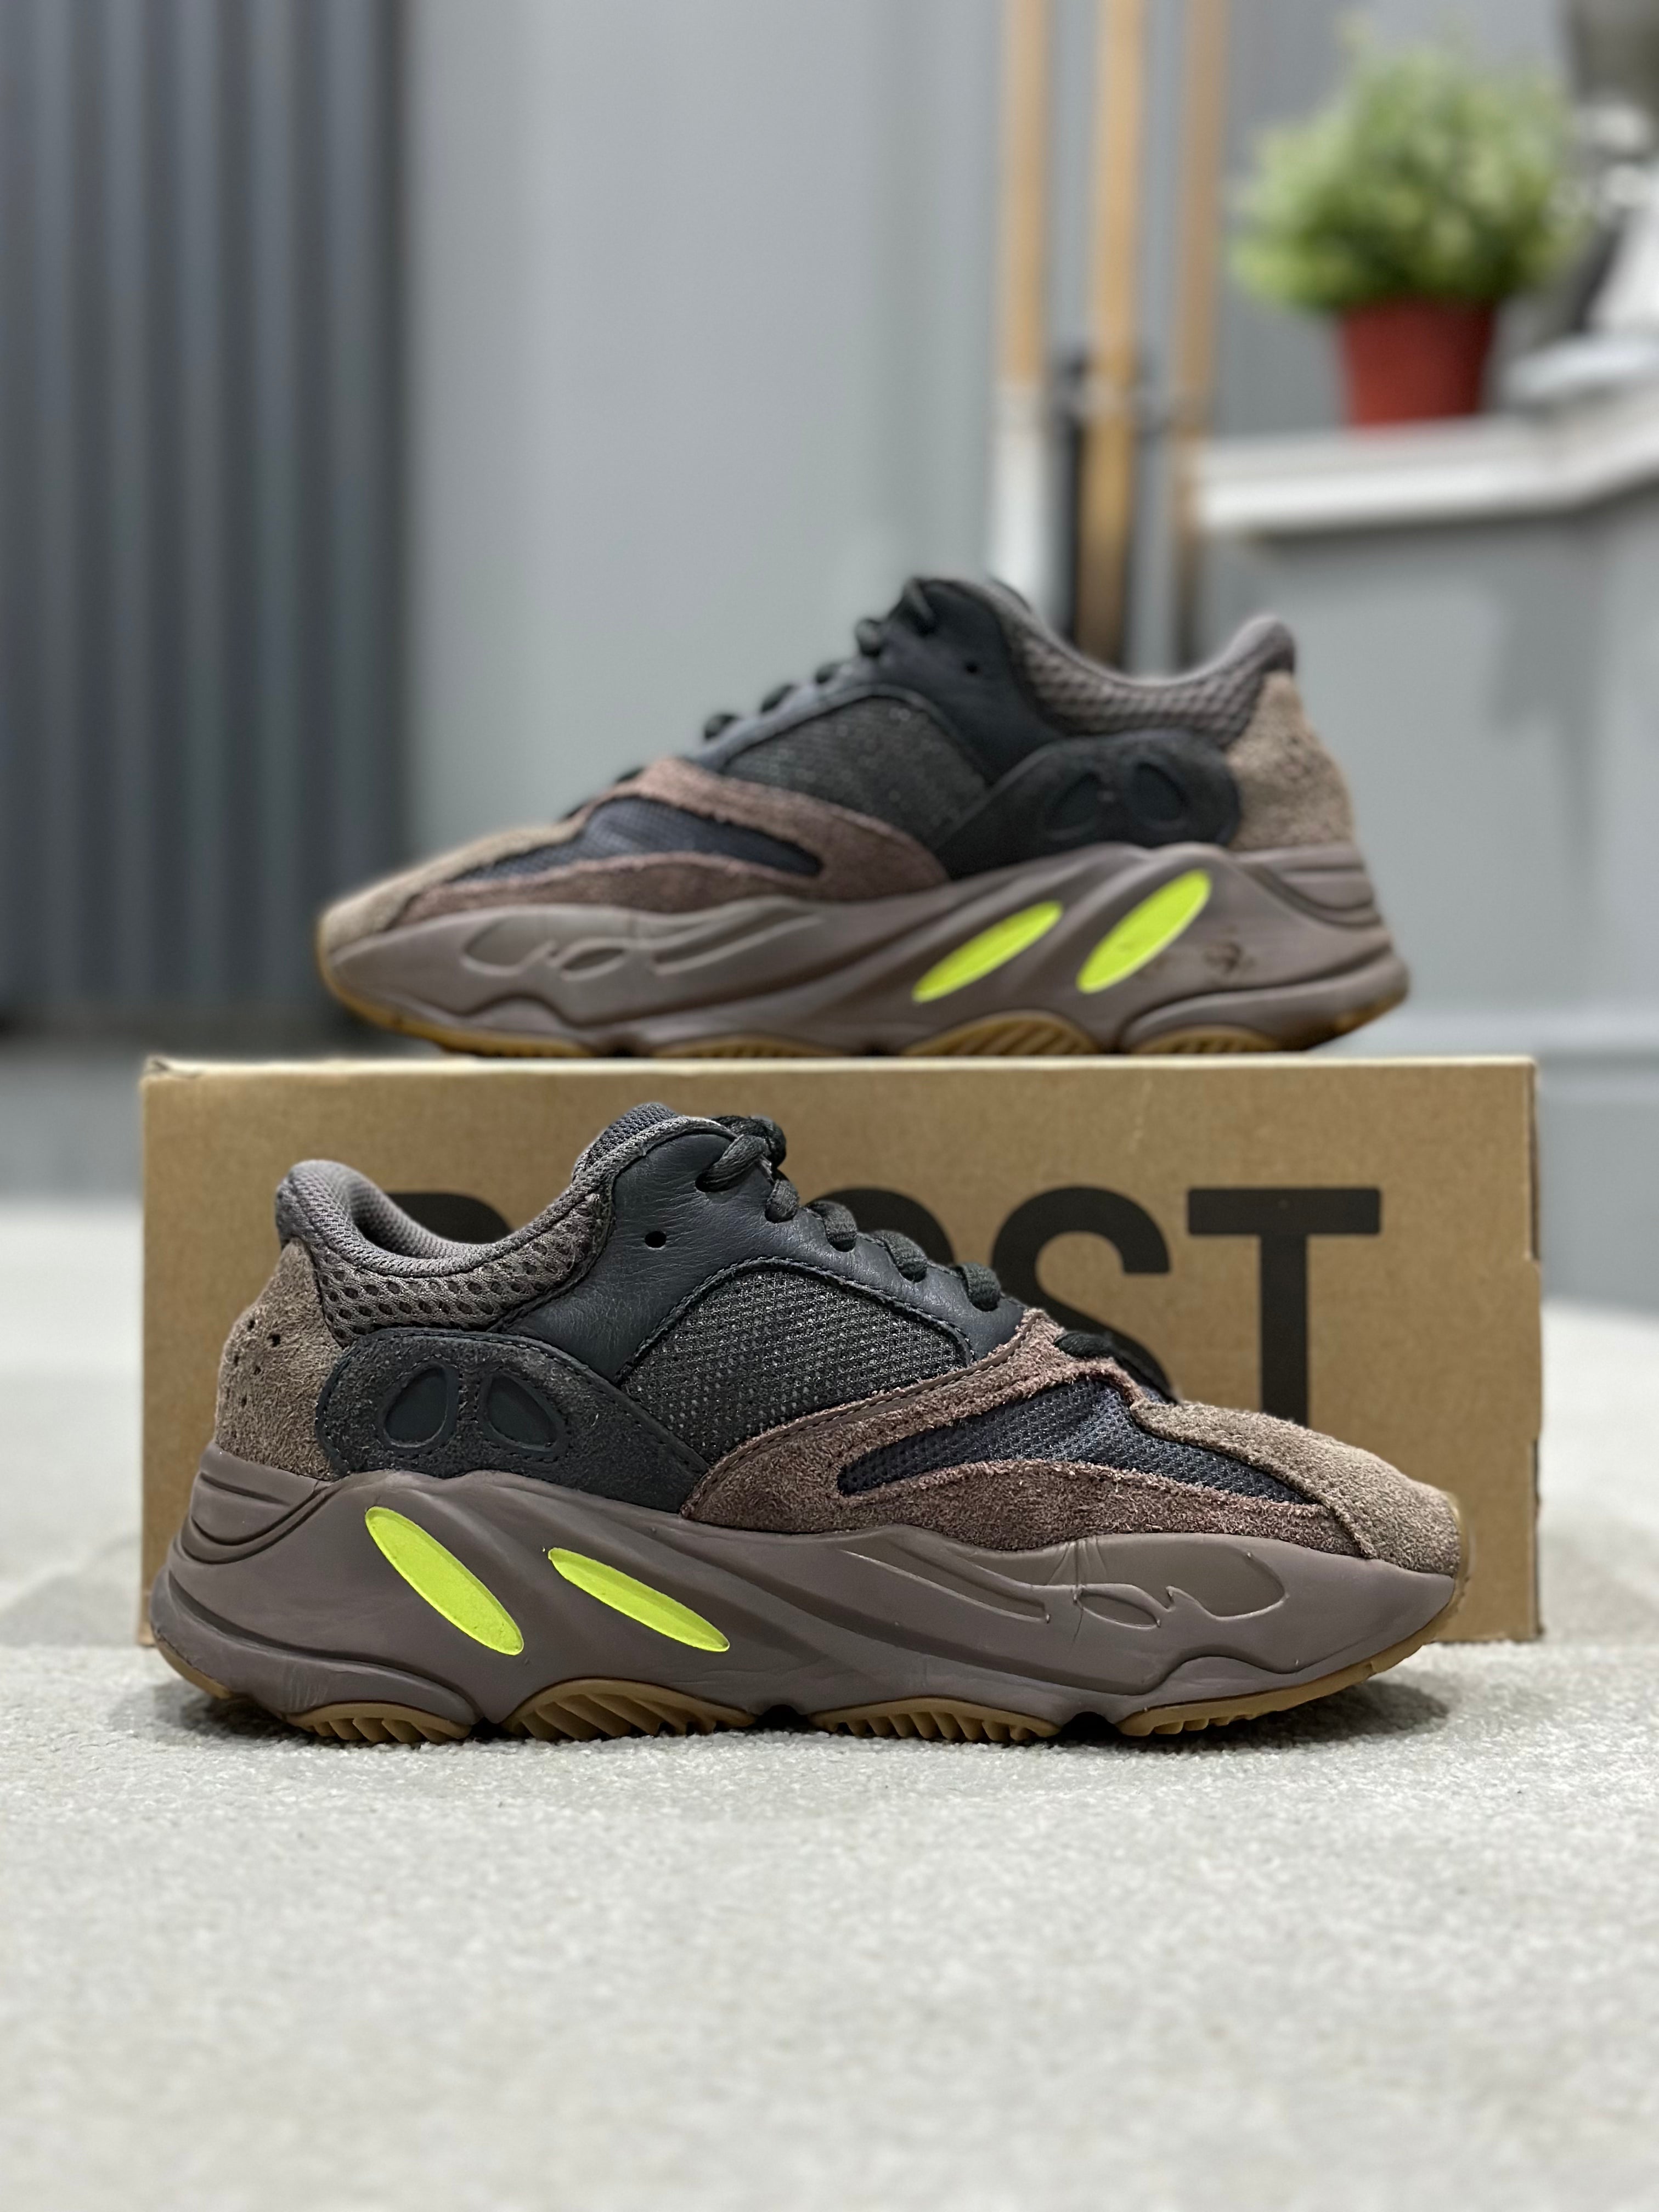 Yeezy Boost 700 'Mauve' (Pre-Loved) UK 3.5